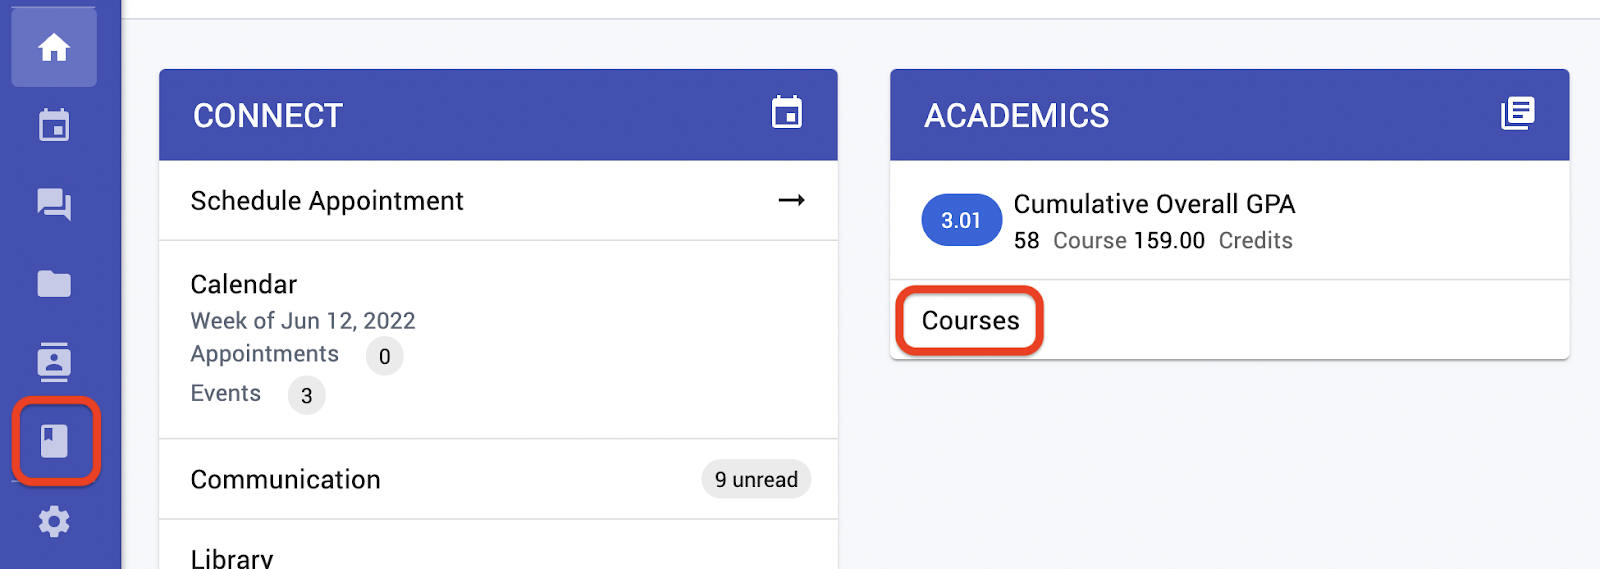 The Courses link on the Academics card opens the same page as Course History on the left menu